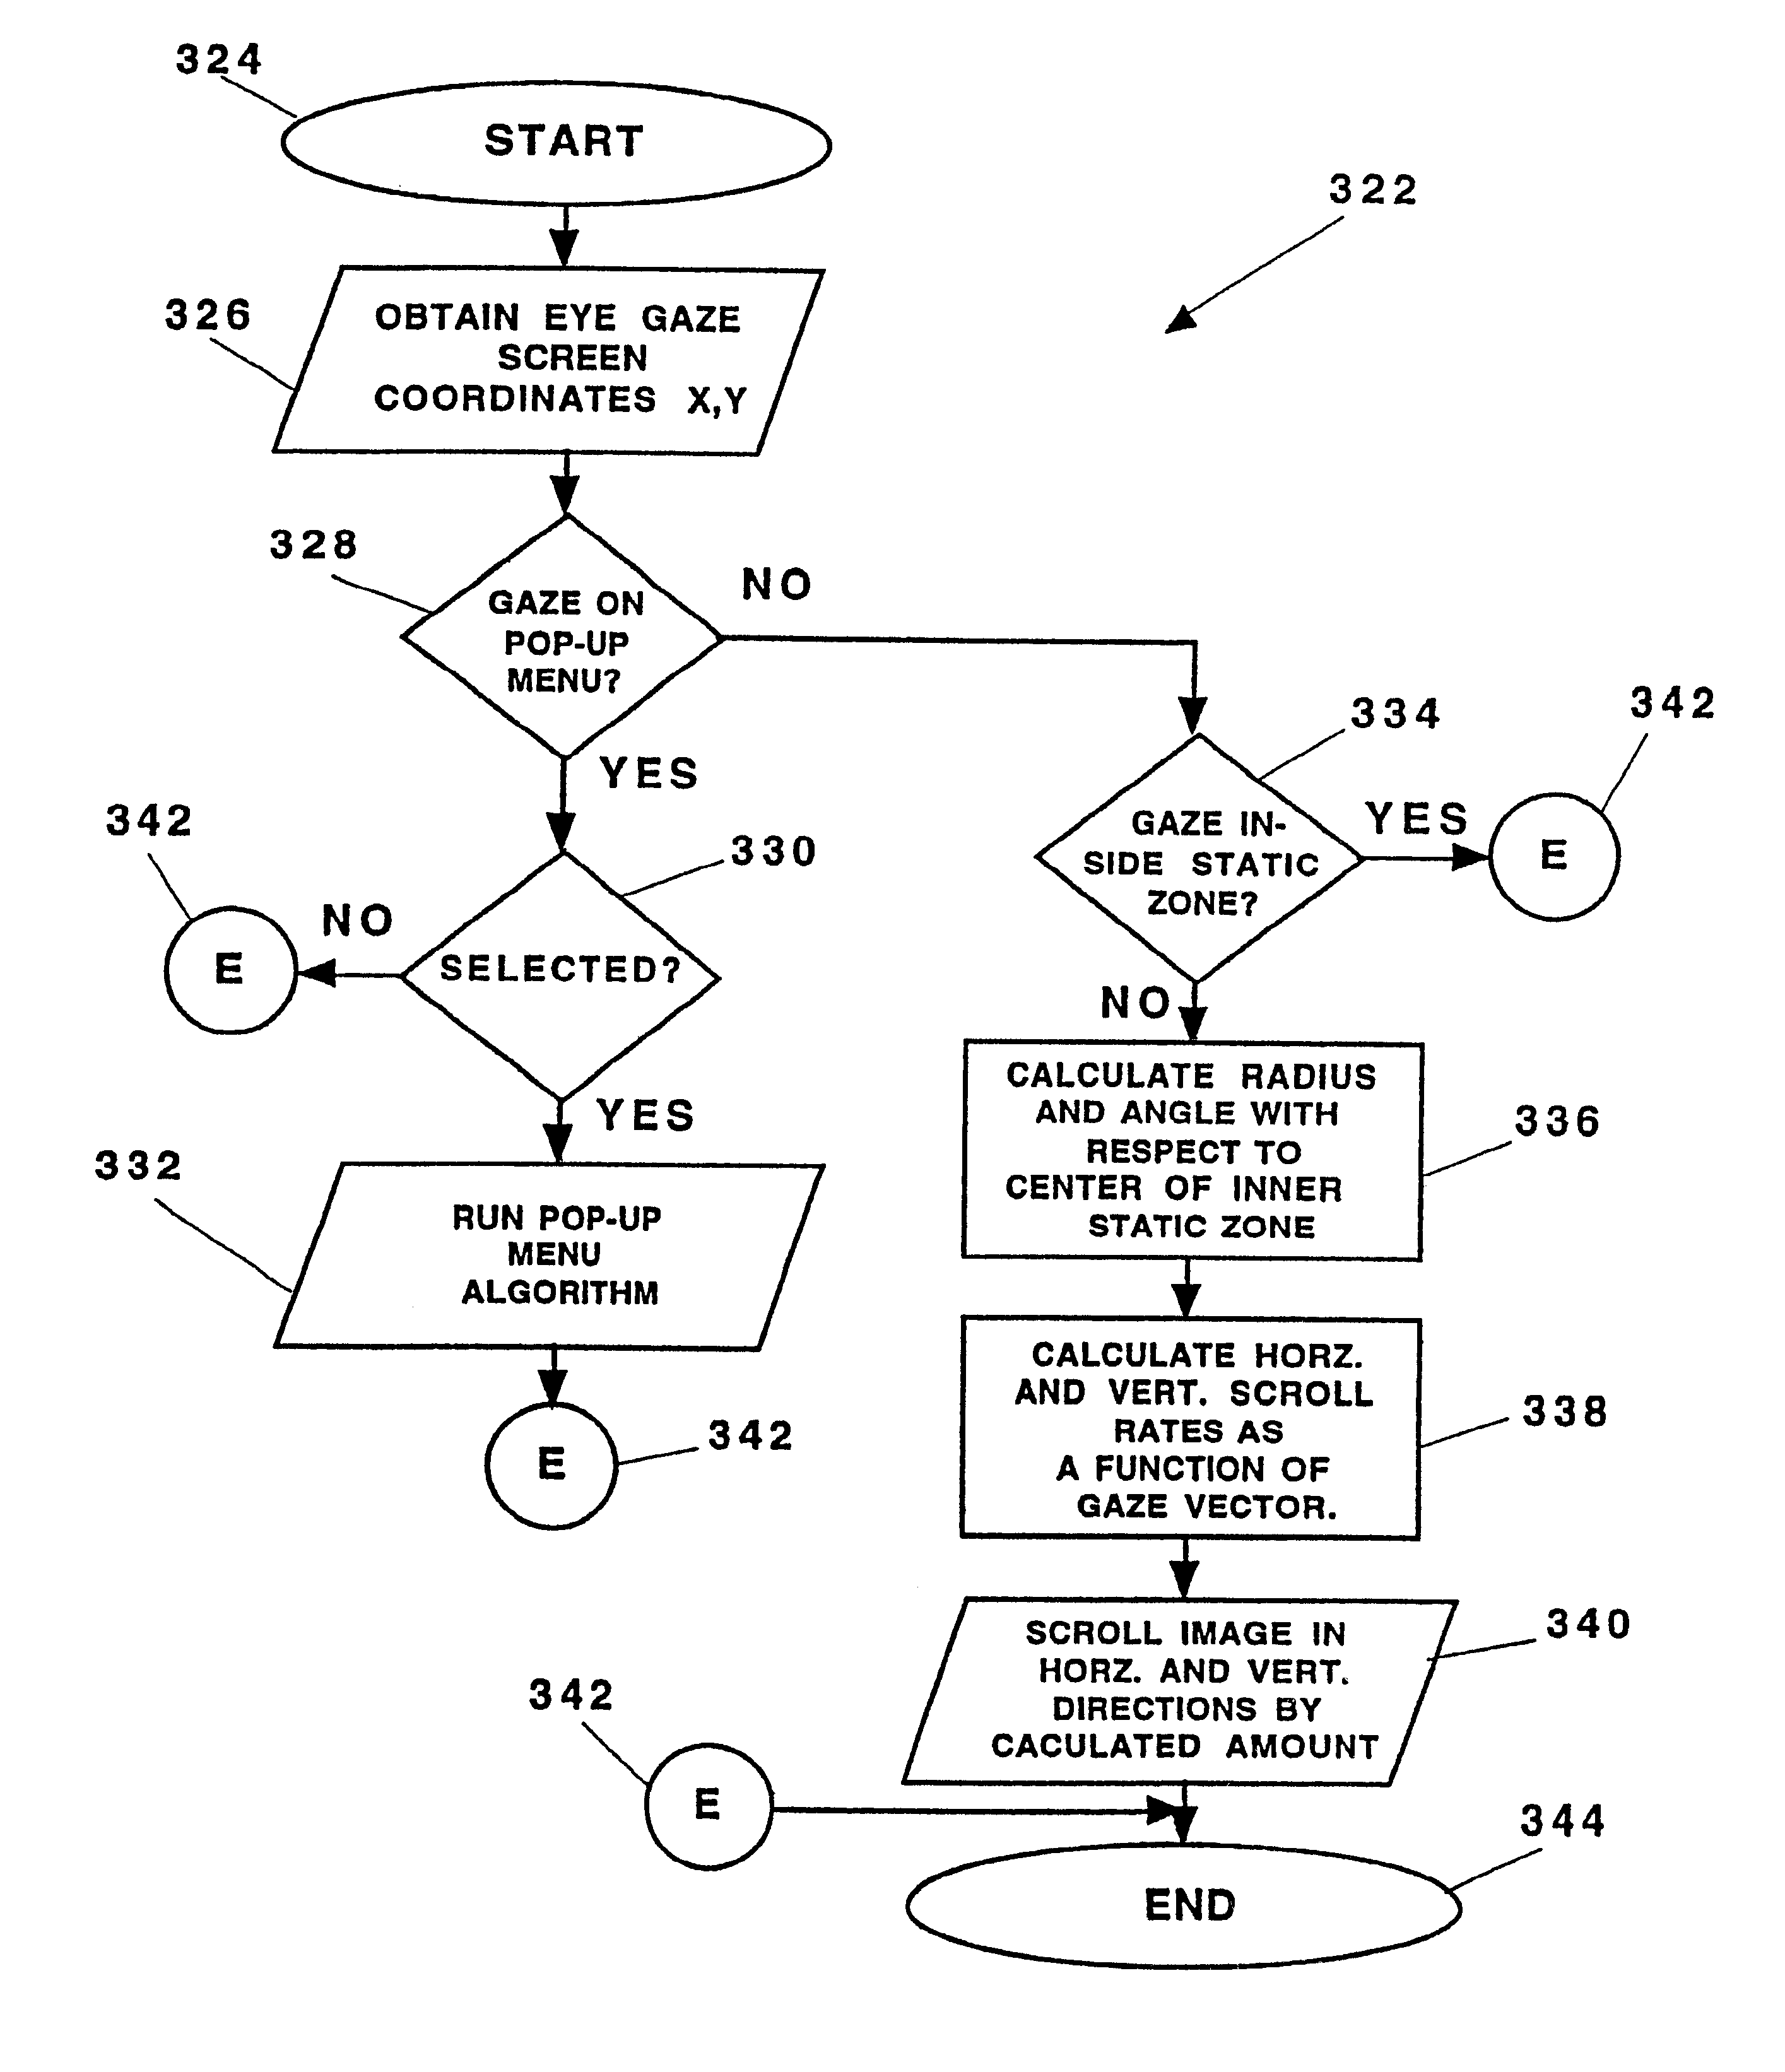 System and methods for controlling automatic scrolling of information on a display screen